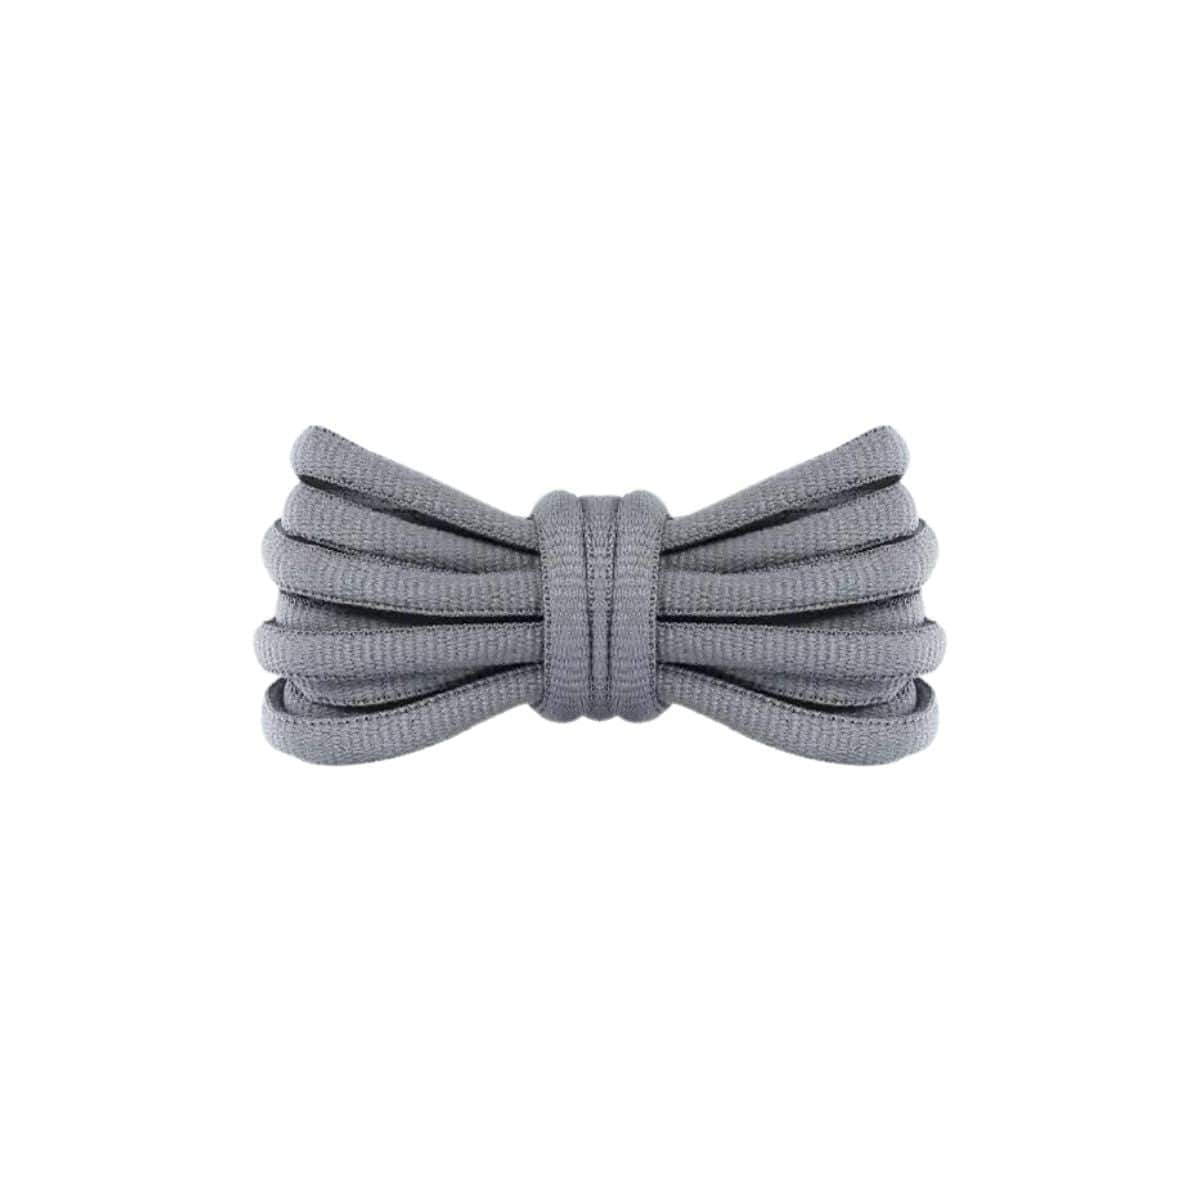 New Balance 1906 Shoe Lace Replacement Grey / 140 CM / 55 IN / Oval / 9mm Shoe Lace Replacement By Kicks Shoelaces